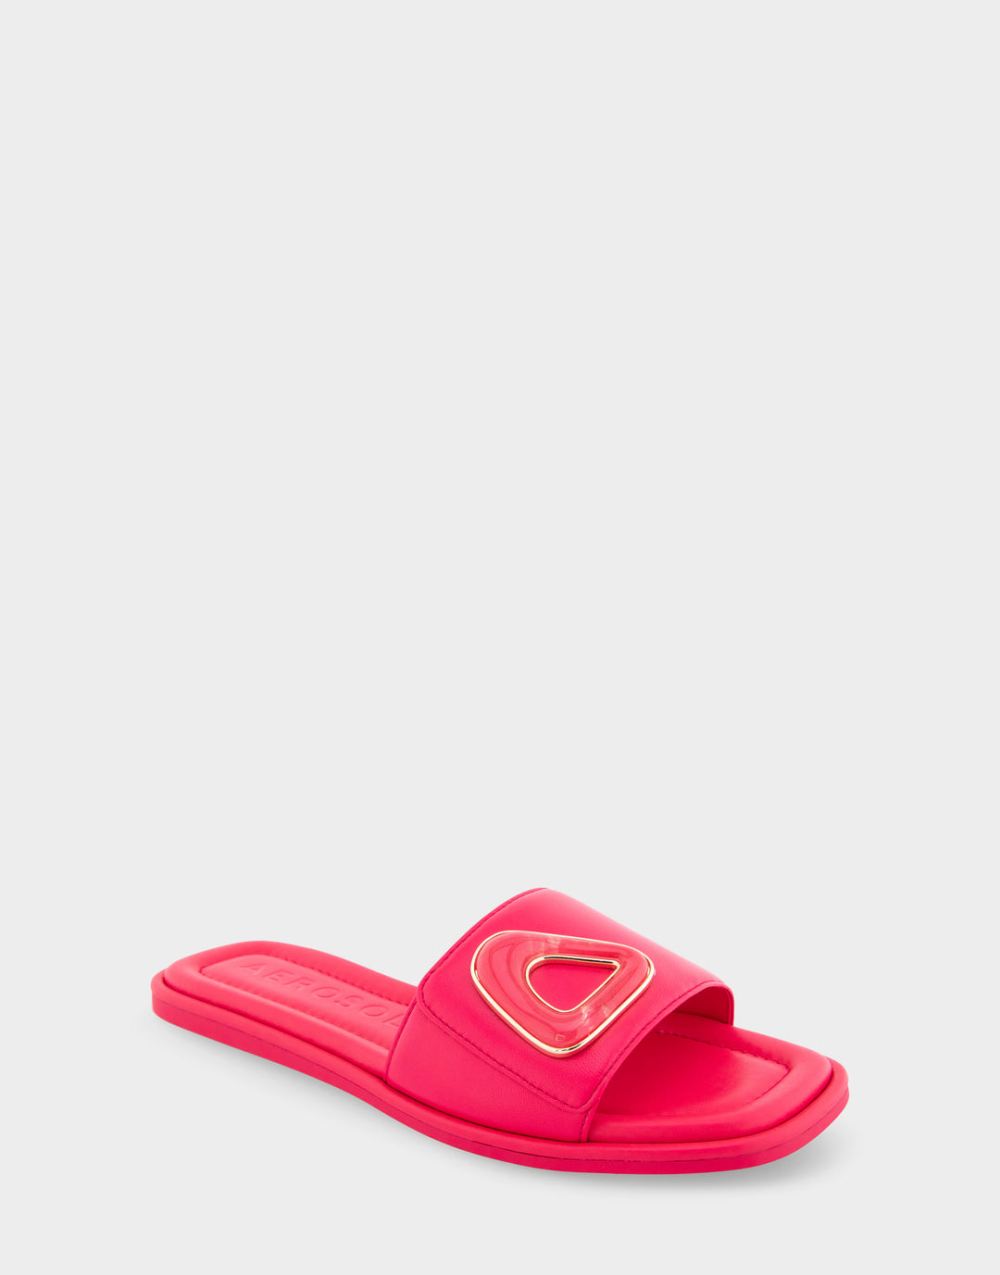 Women's | Blaire Virtual Pink Leather Ornamented Single Band Slide Sandal